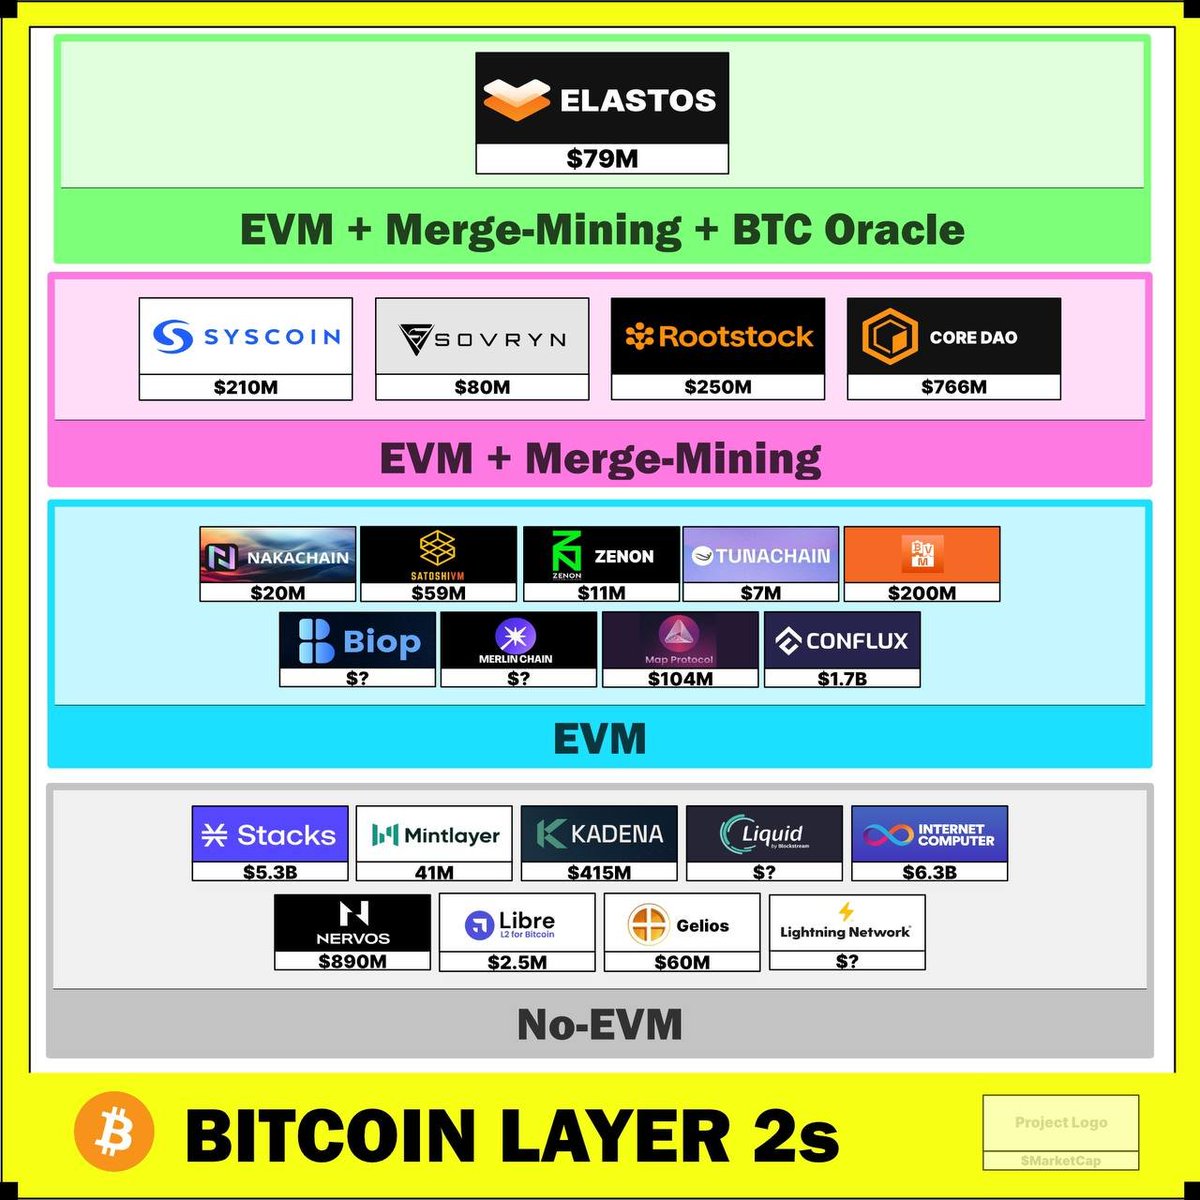 @DIAdata_org @Stacks @naka_chain @build_on_bob @Liquid_BTC @mintlayer @rootstock_io @ZestProtocol @BTClayer2 @BadgerDAO $ELA is a sleeping giant about to wake up! @Be_Layer2 is not just another #BTC #L2 , it is going to implement a BTC Oracle able to connect #BTC to every #EVM compatible blockchain and is secured by more than 50% of BTC hashpower through merge-mining. Don't sleep on #Elastos!